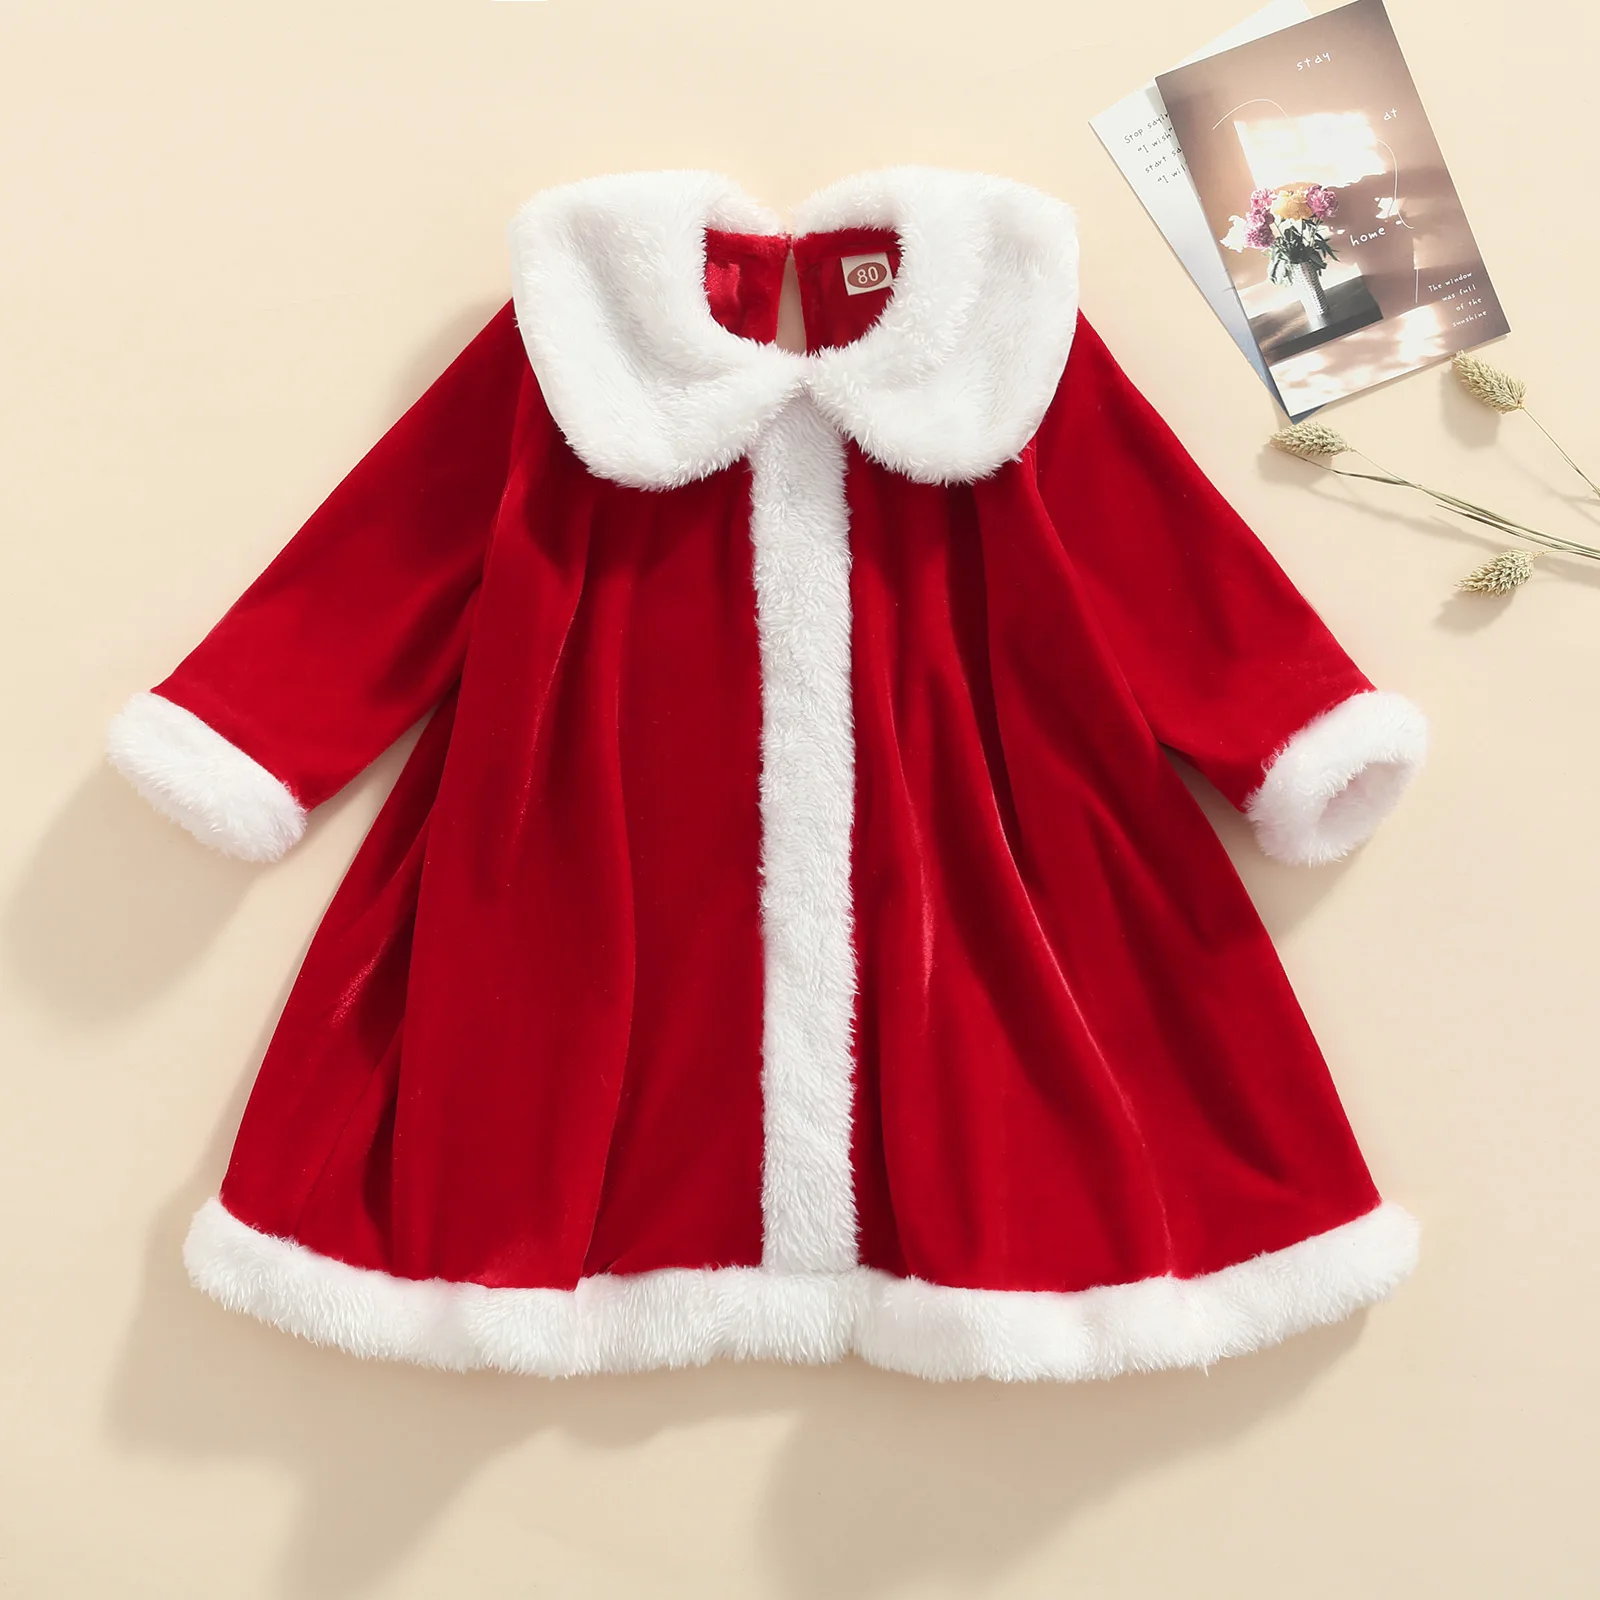 

Coral Fleece Christmas Coat Baby Kids Girls Dress Outwear Splicing Color Peter Pan Neck Long Sleeves Skirt for 6M to 4 Years